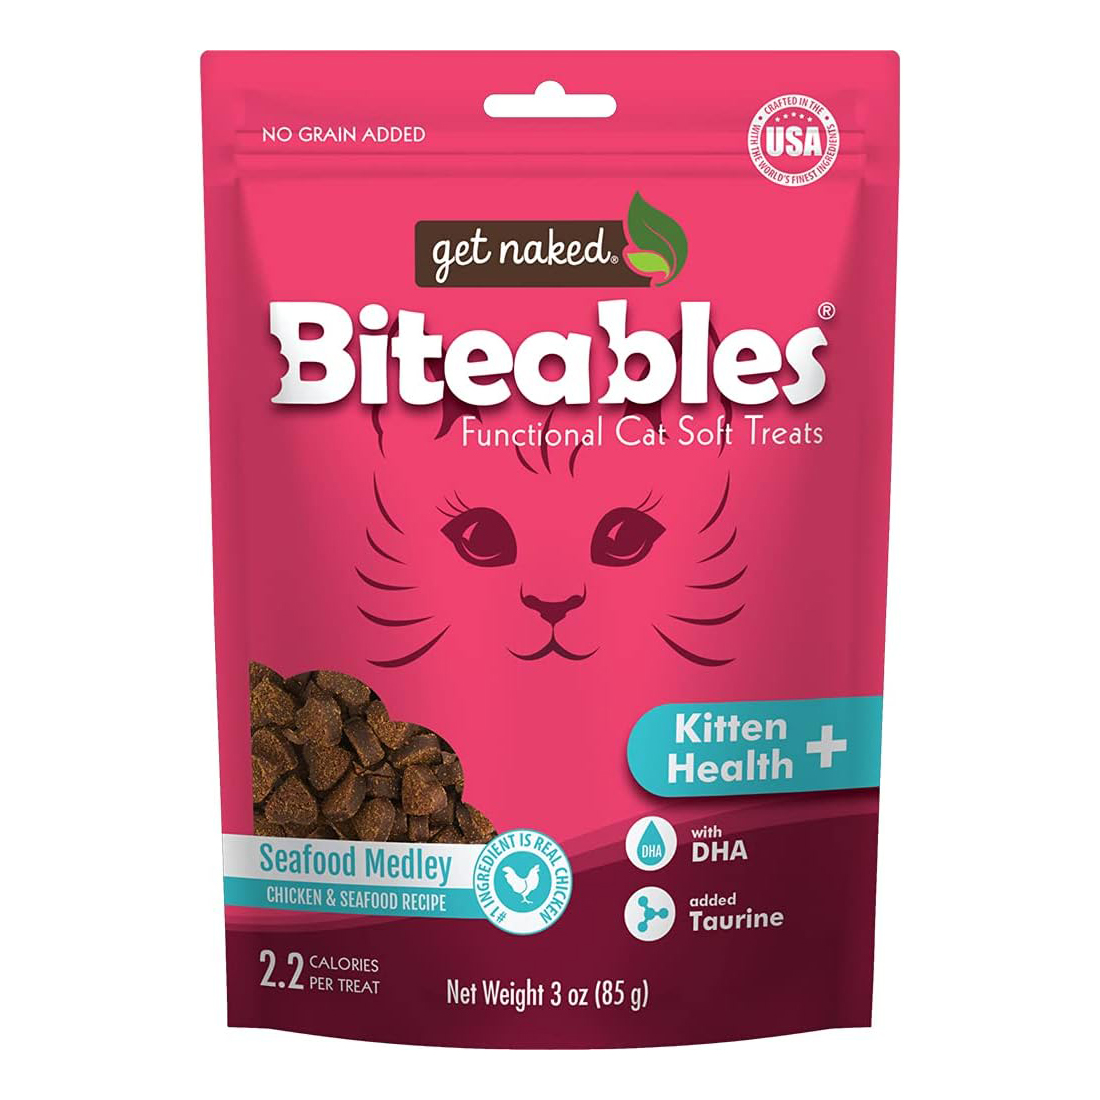 Get Naked Biteables Natural Soft Treats for Cats